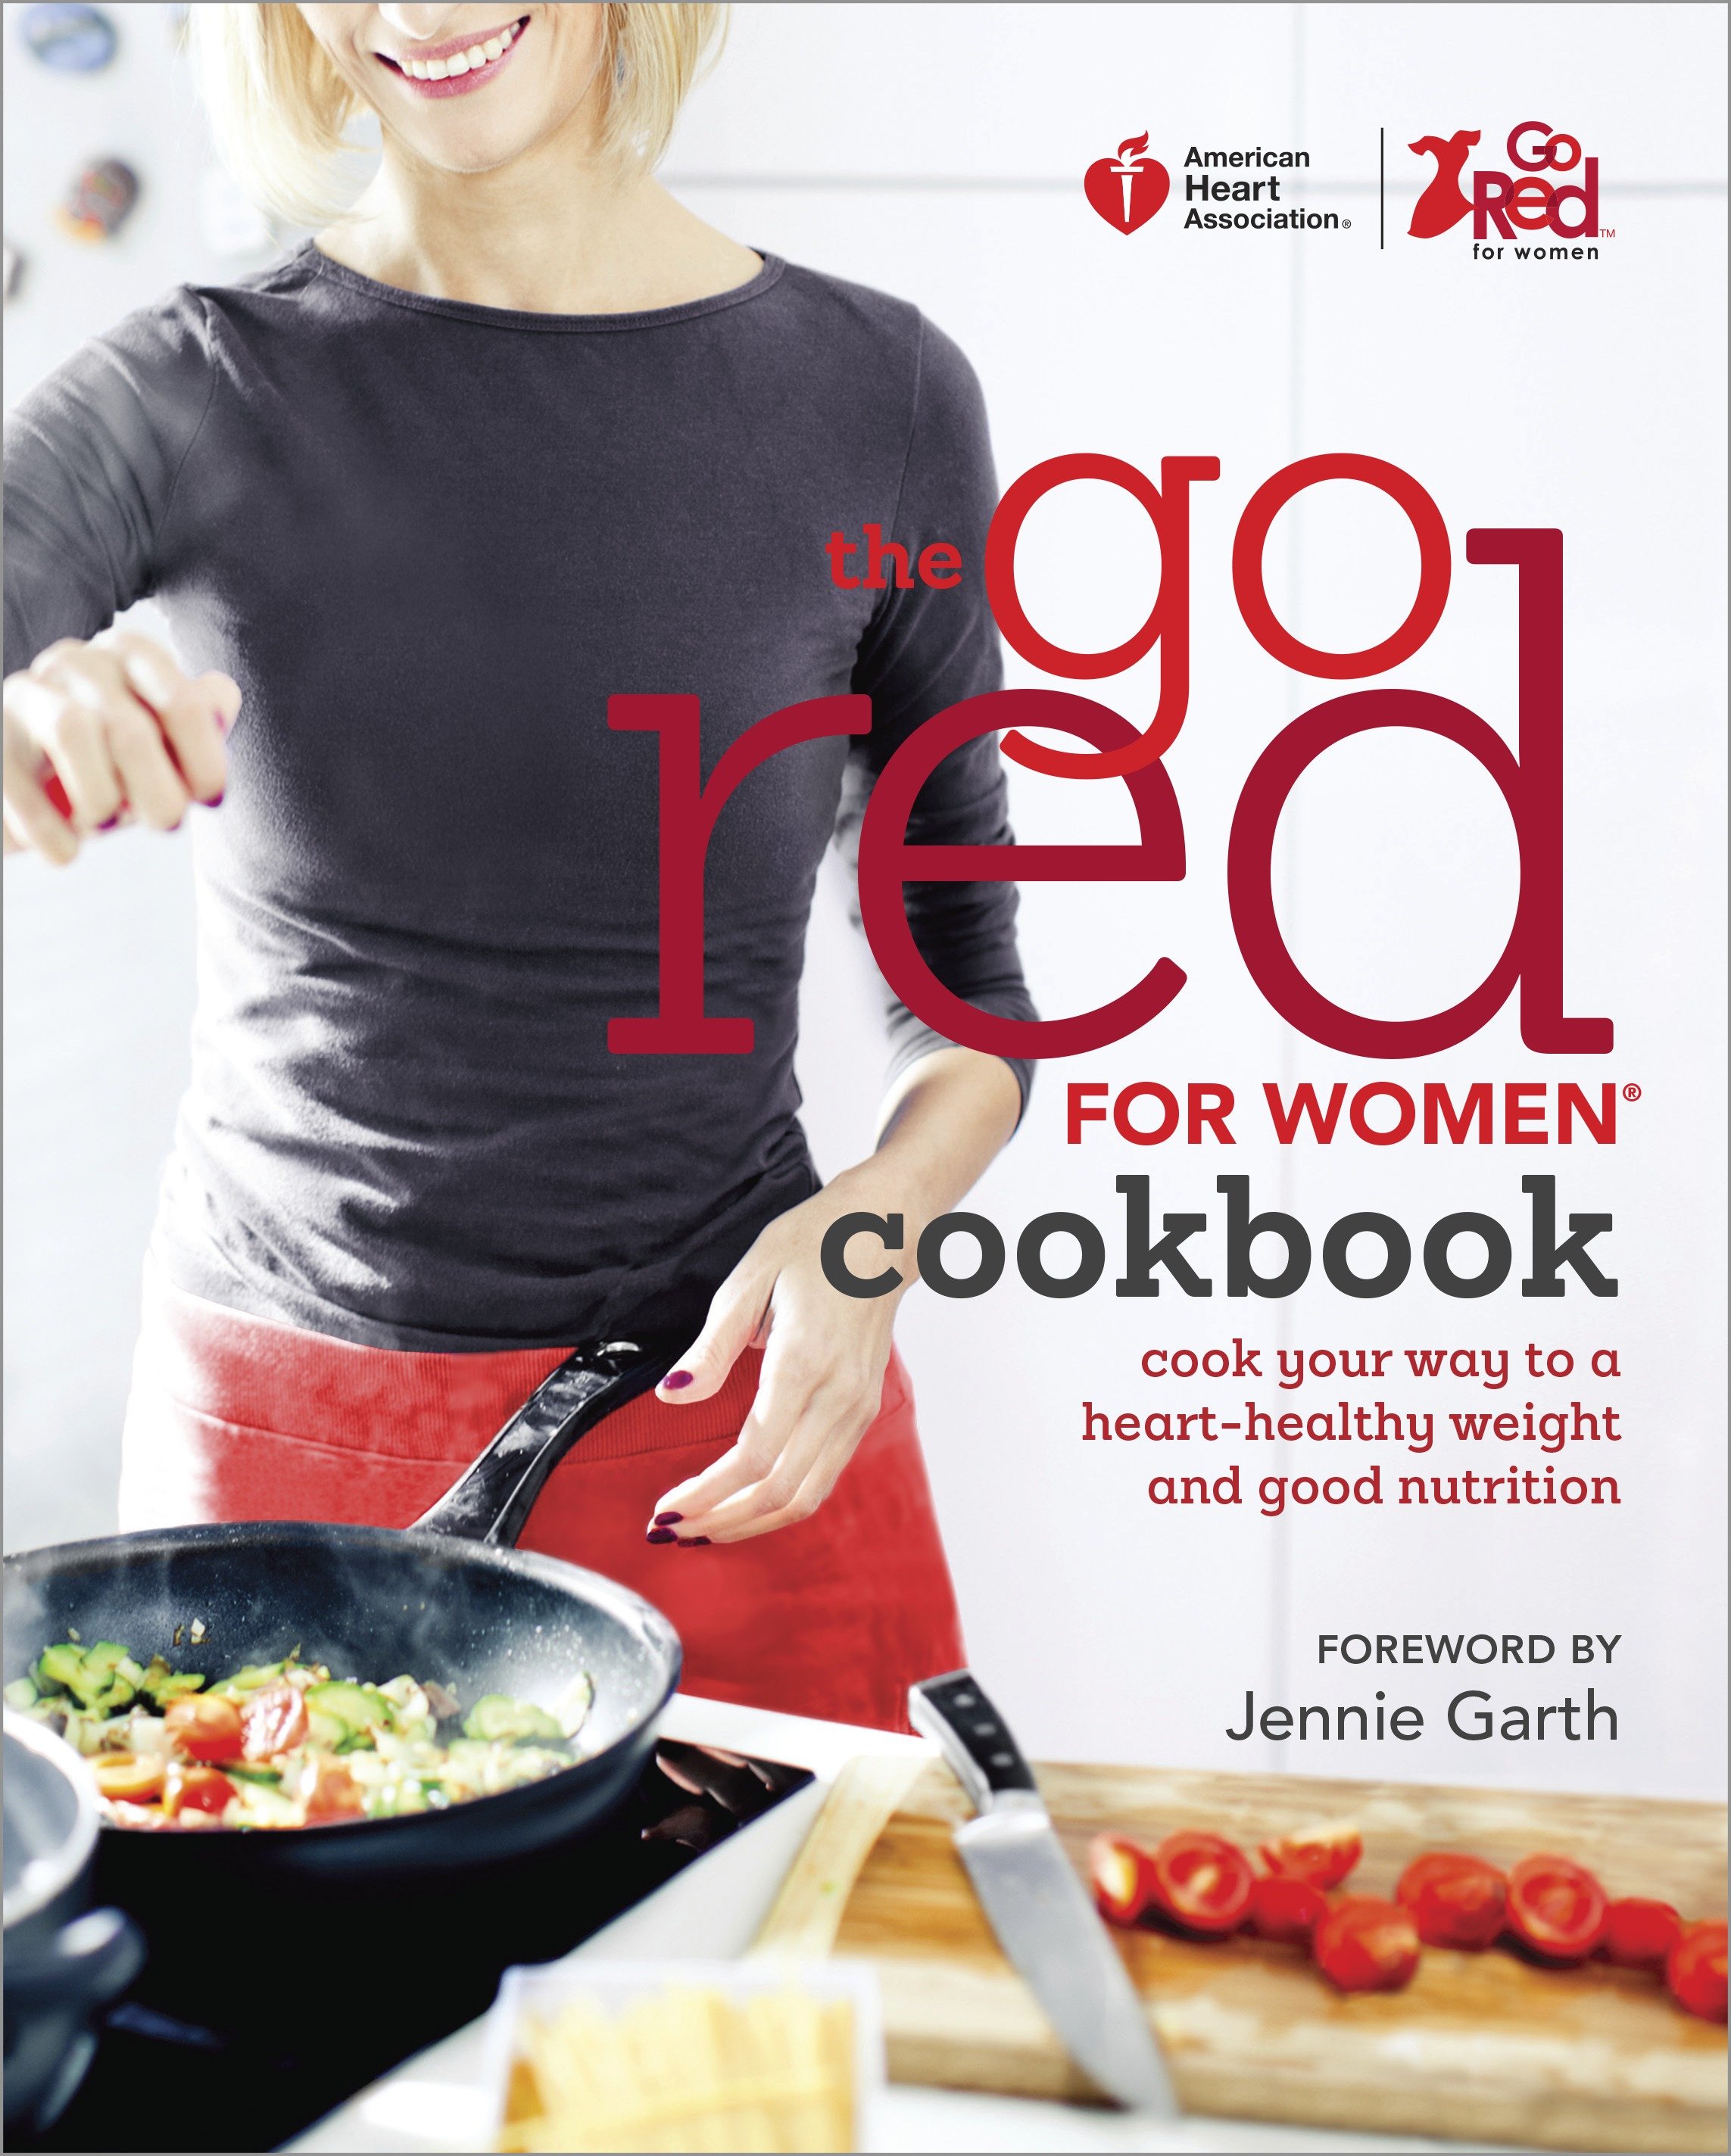 American Heart Association the go red for women cookbook Cook Your Way to a Heart-Healthy Weight and Good Nutrition cover image